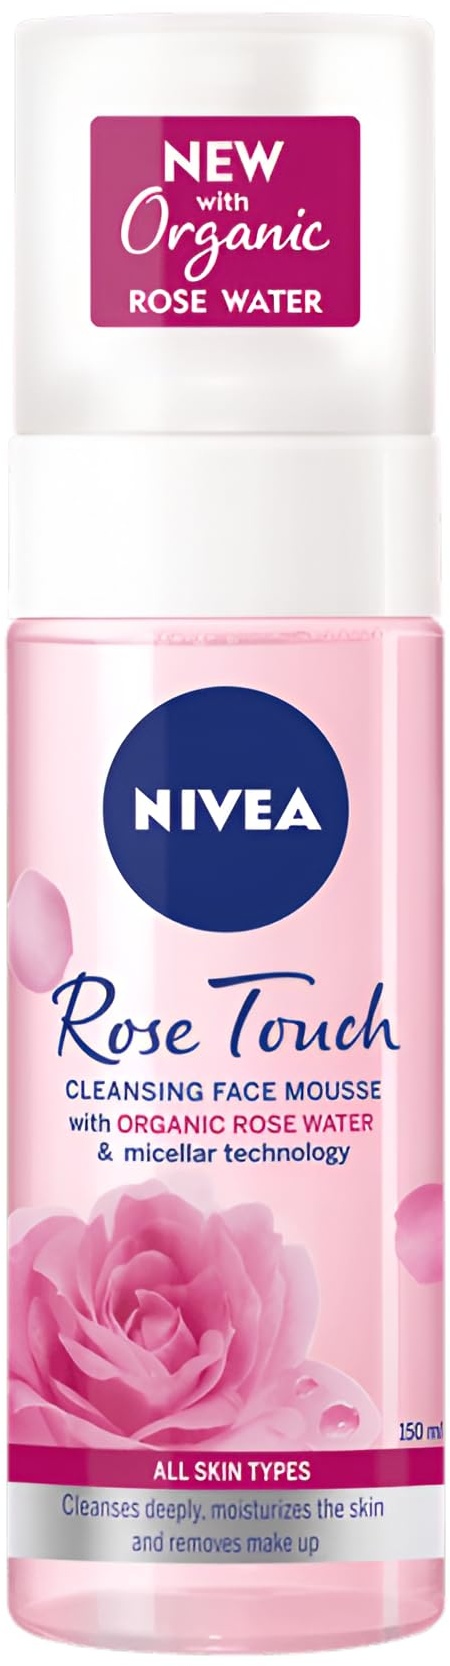 NIVEA Cleansing Face Mousse Rose Touch, 150ML (PACK OF 2) Bio Rose Water, Micellar Technology for Smooth and Hydrated Skin with Delicate Scent 2 x 150 ml